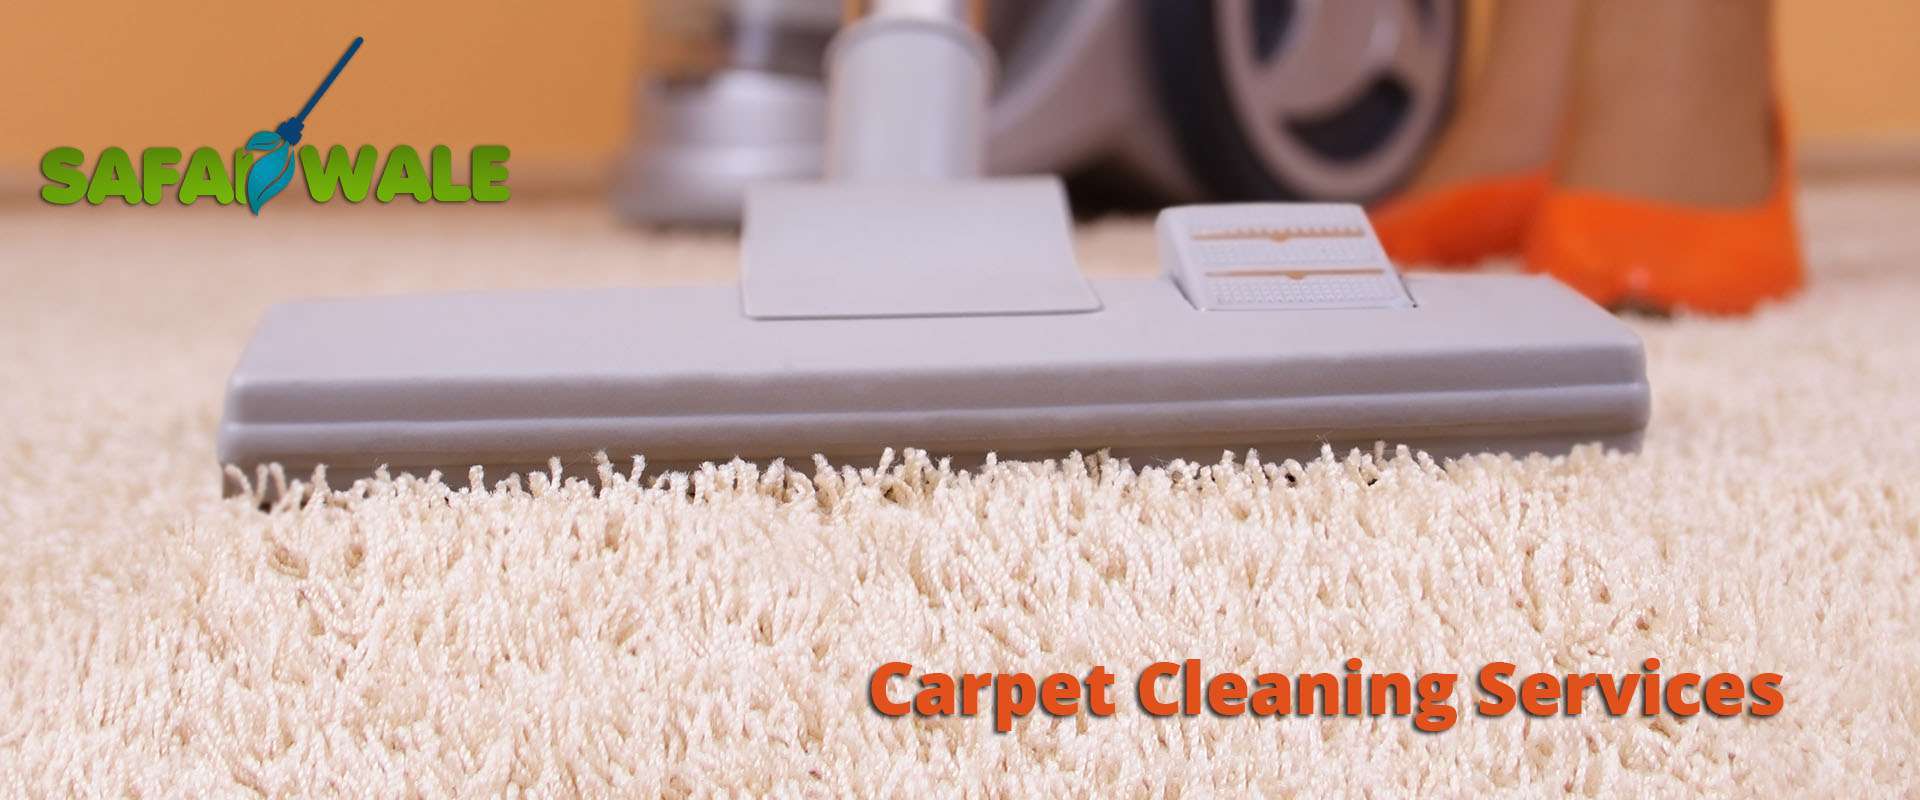 carpet cleaning services in ghaziabad